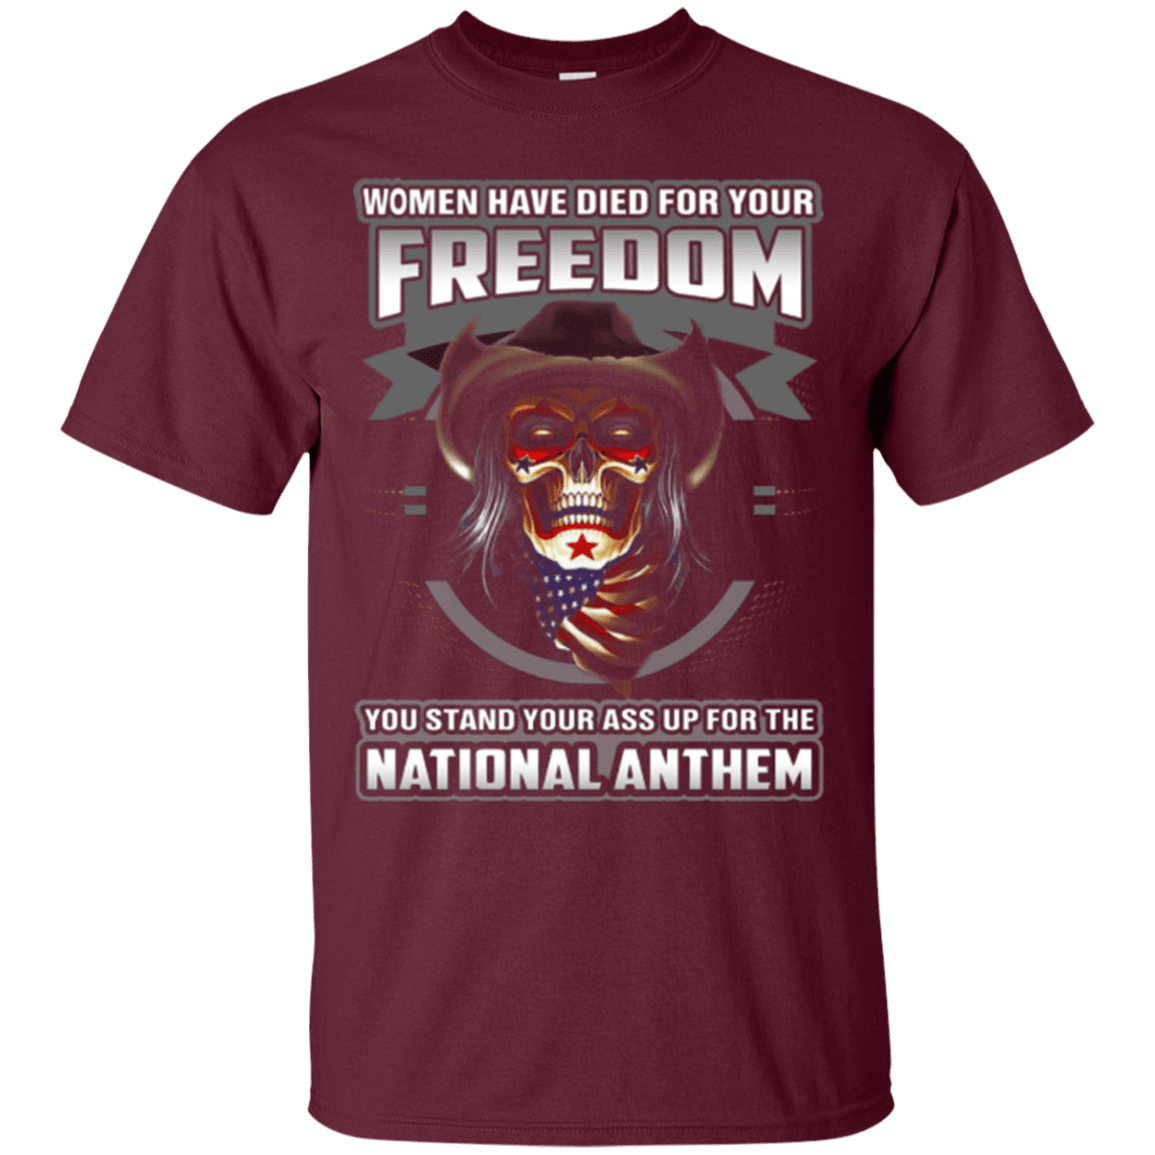 Military T-Shirt "Women Have Died For Your Freedom Stand Up For The National Anthem"-TShirt-General-Veterans Nation